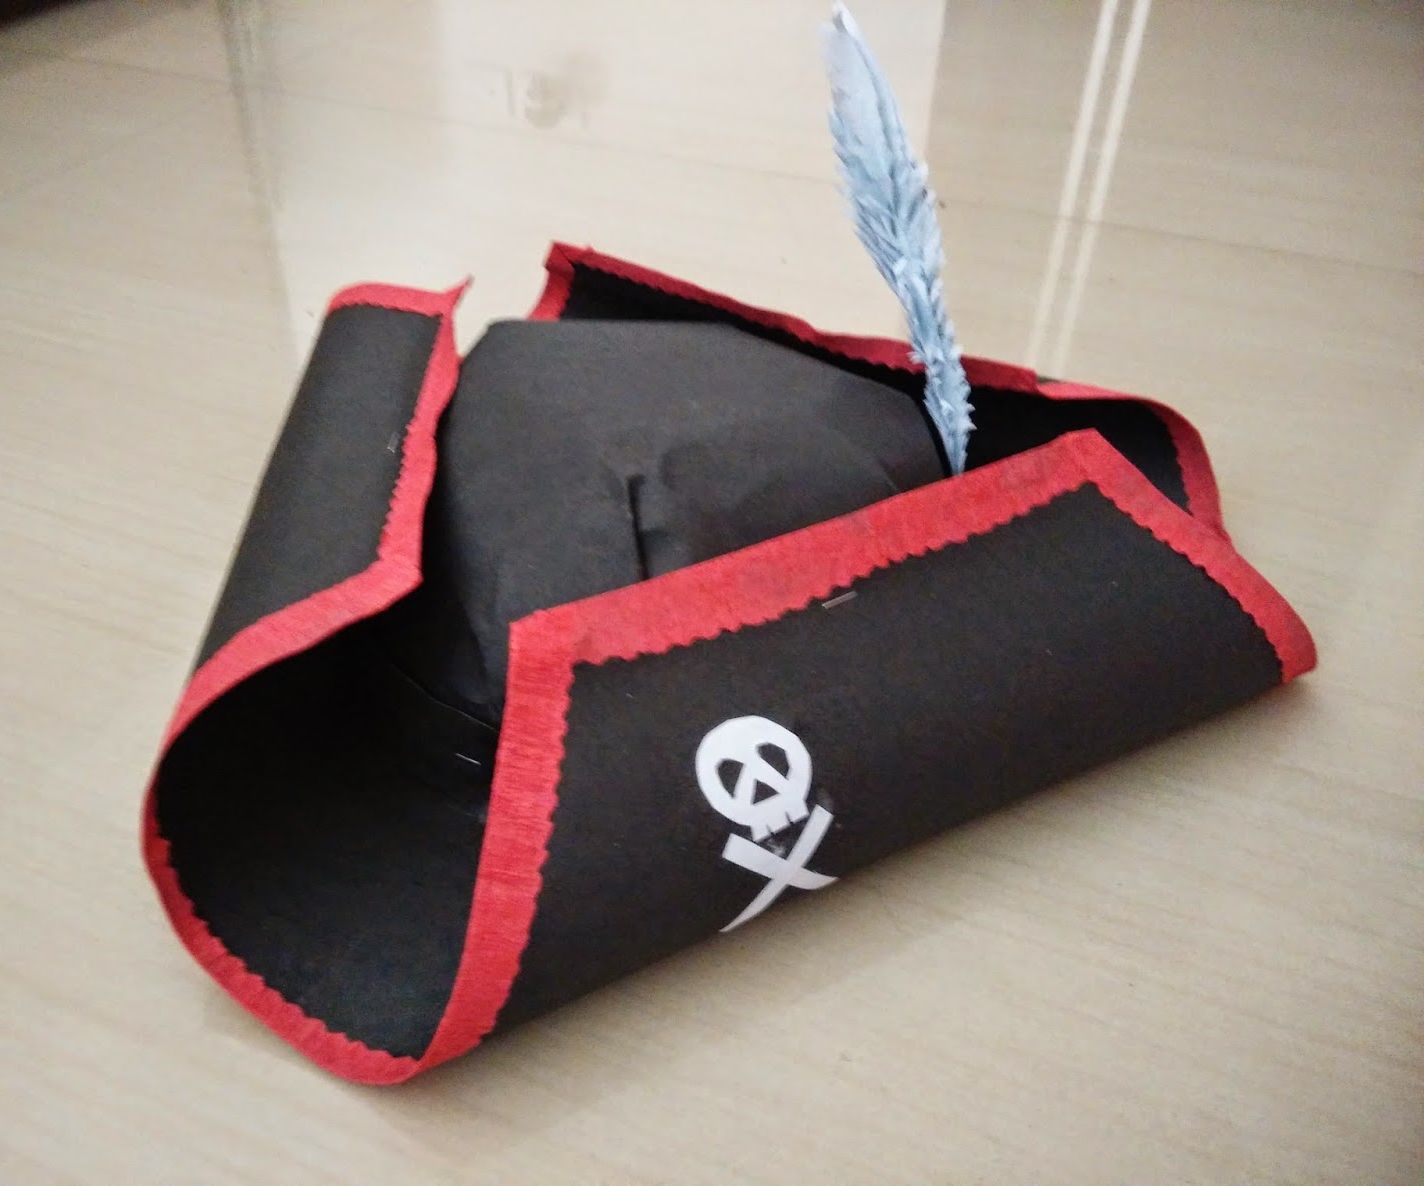 Pirate's Hat Using Paper for Halloween